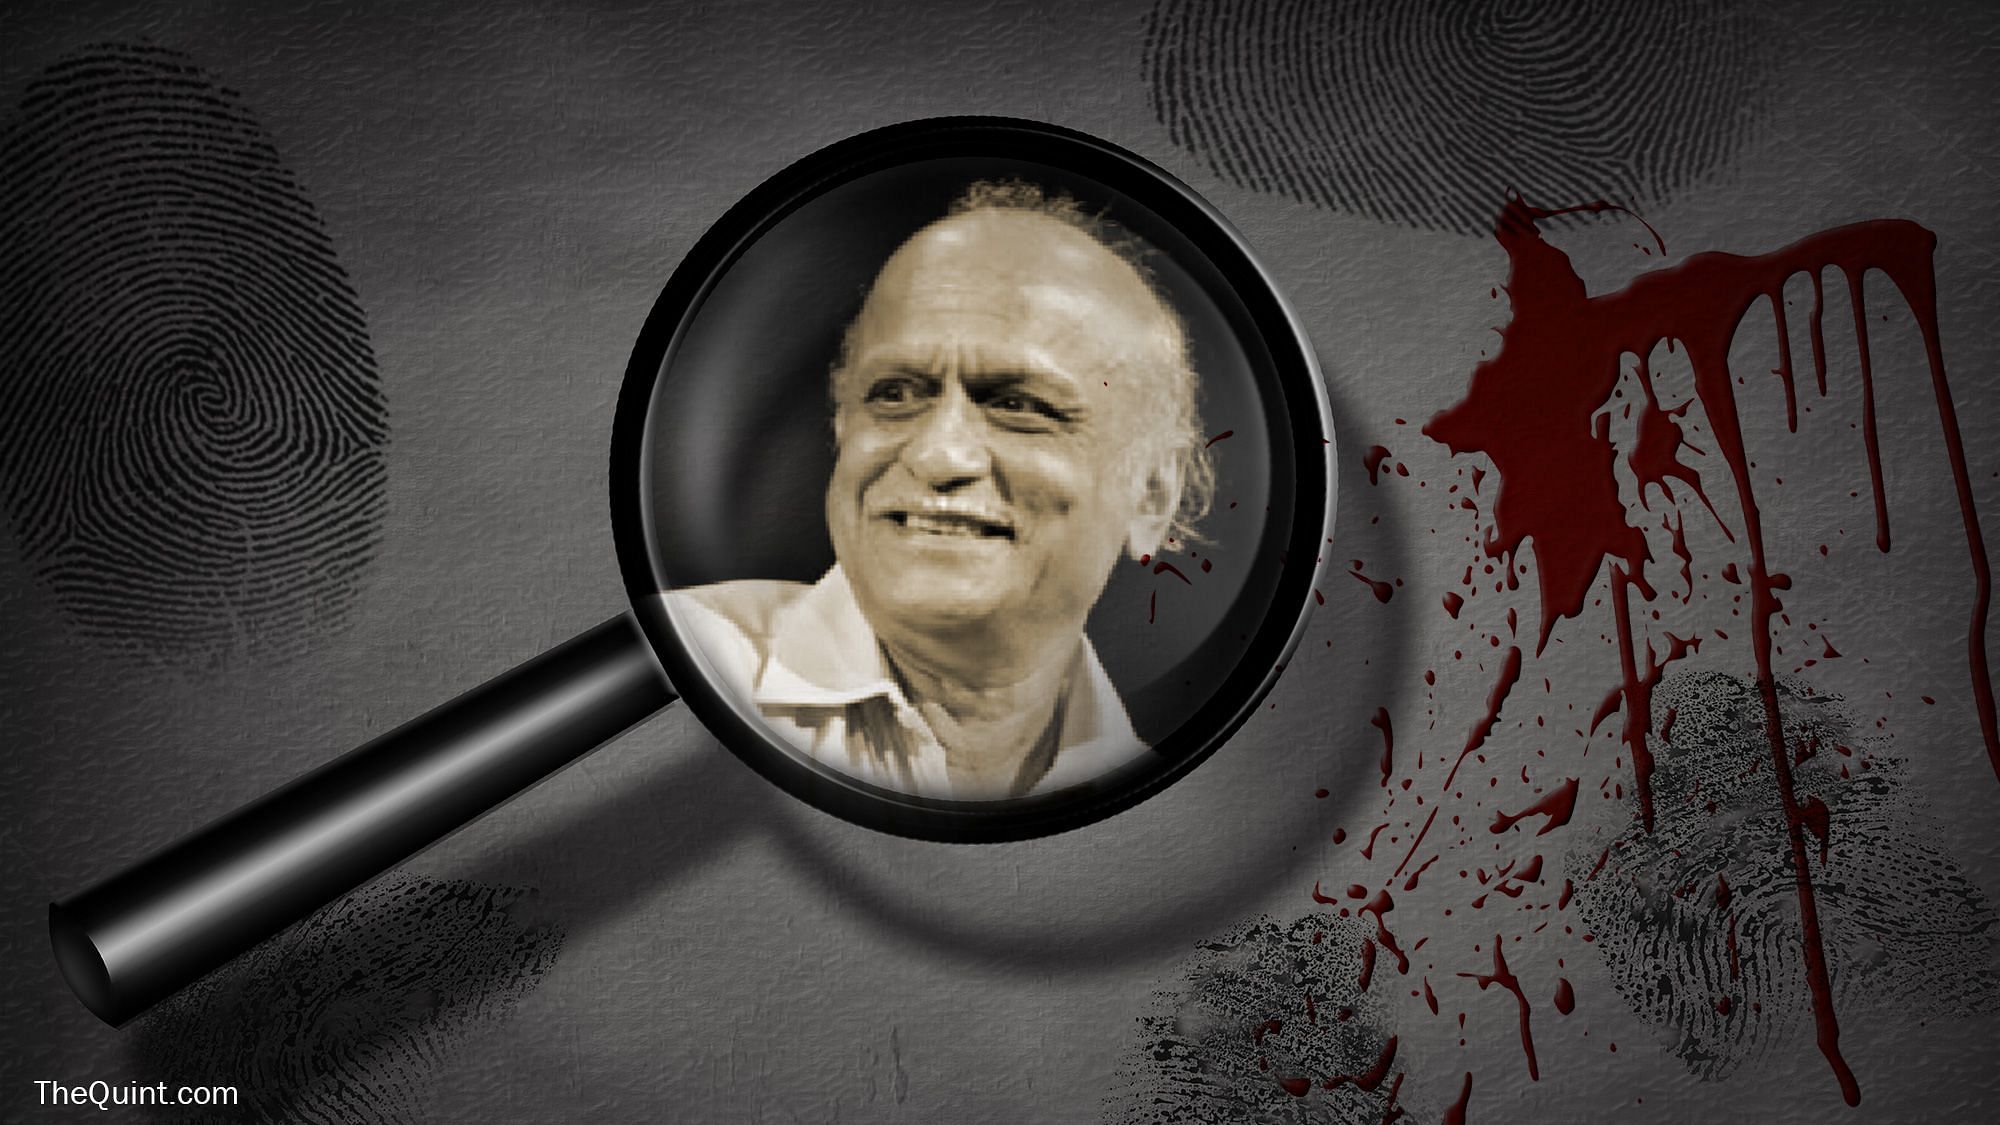 Professor Kalburgi was shot dead by two bike-borne assailants posing as college students on 30 August 2015.